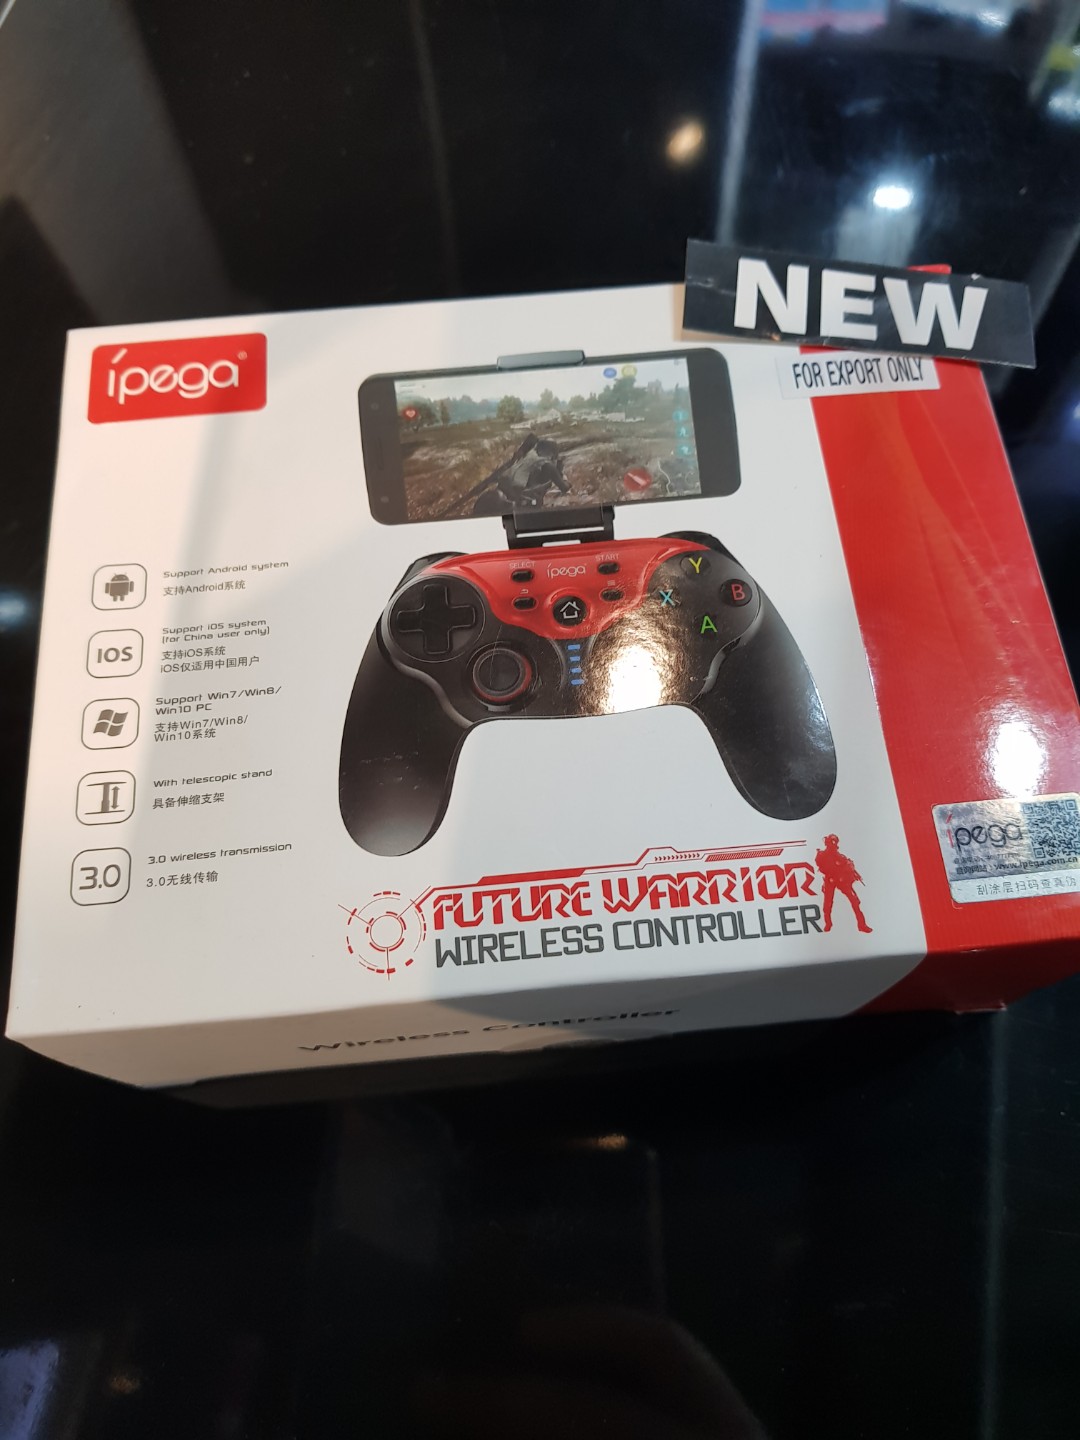 ipega wireless controller pubg fortnite support wireless configuration on carousell - support os fortnite